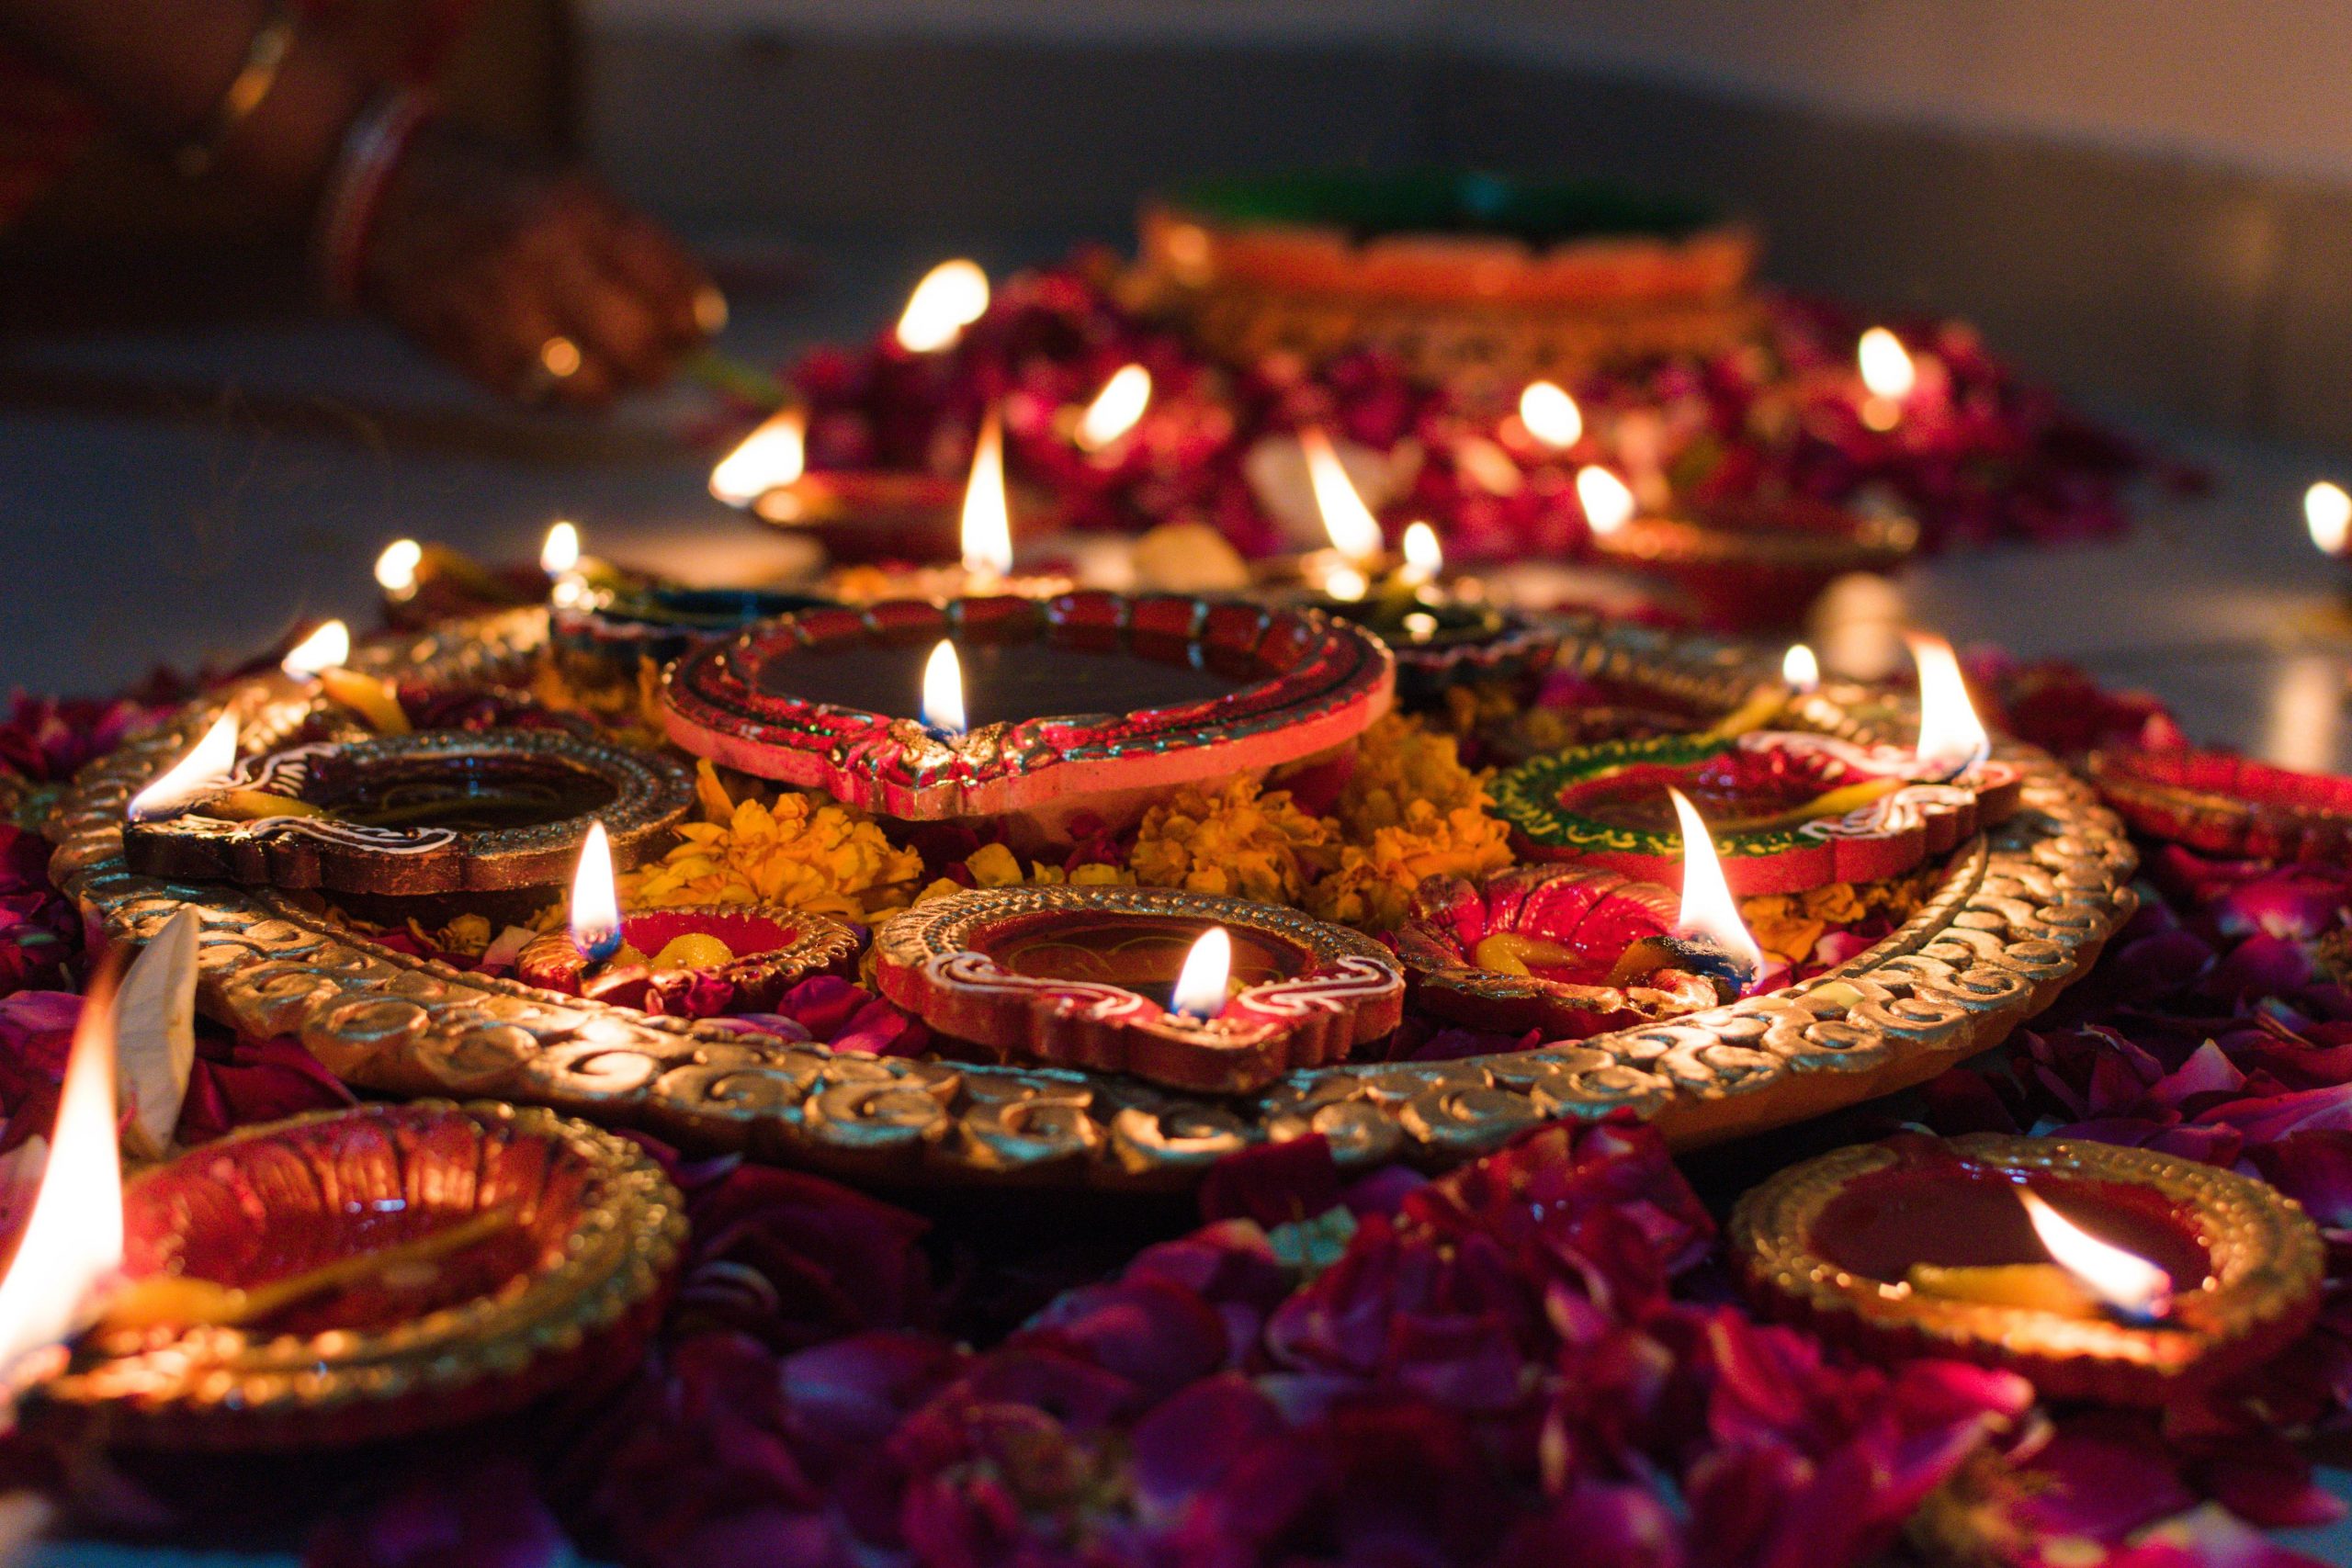 Lit candles during Diwali are said to ward off the darkness and evil